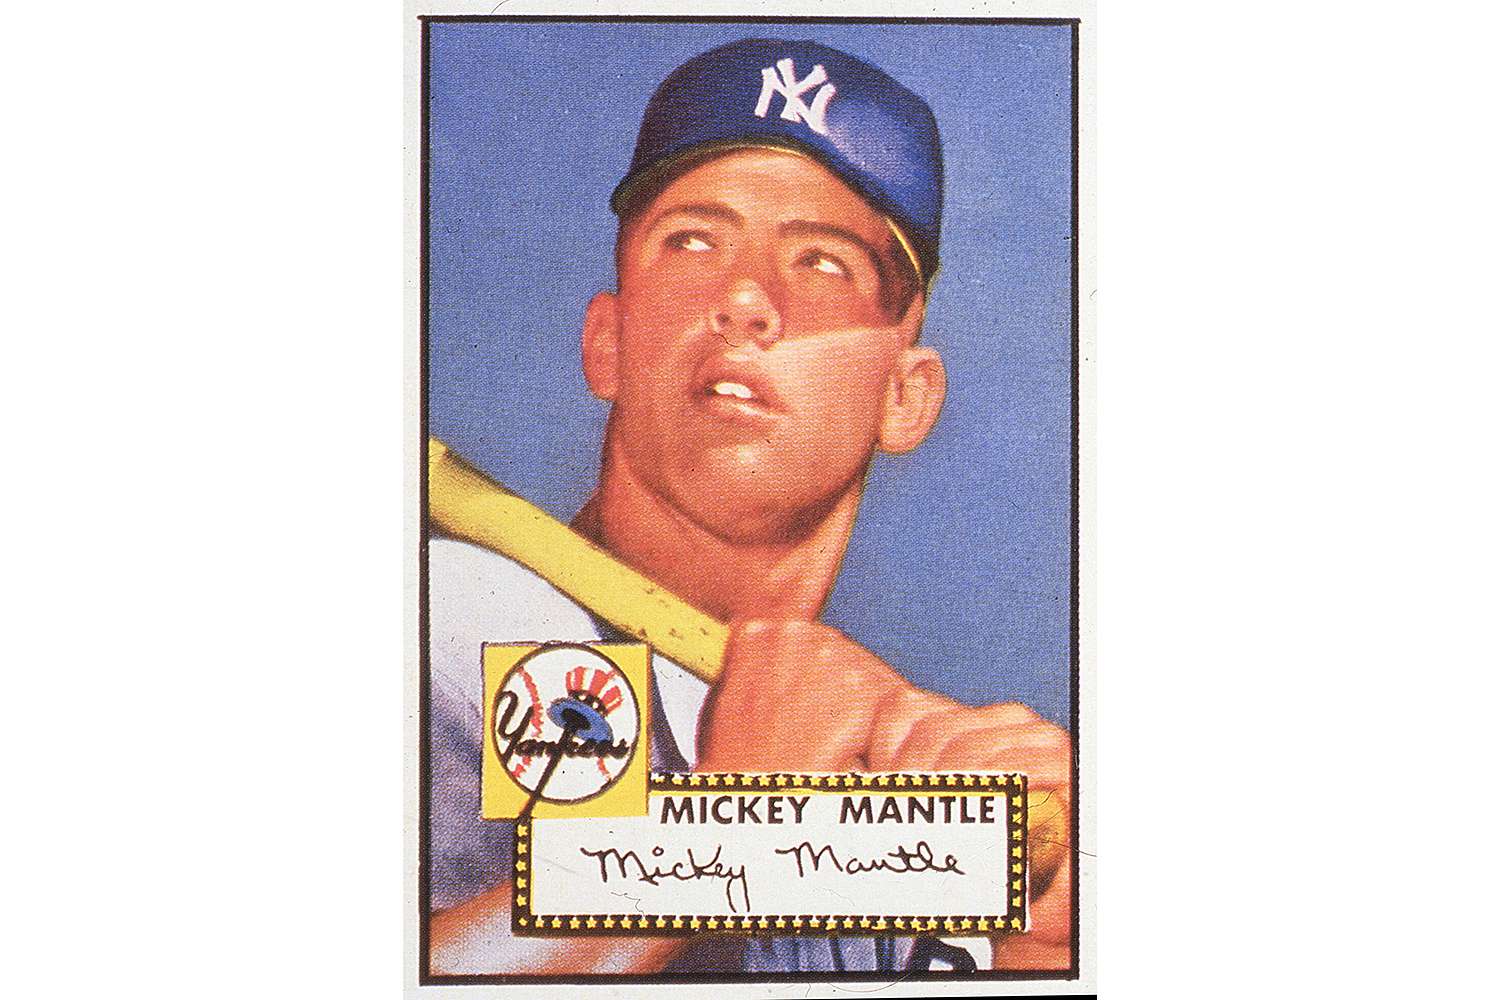 Mickey Mantle Baseball Card Sells for Record $5.2 Million | PEOPLE.com